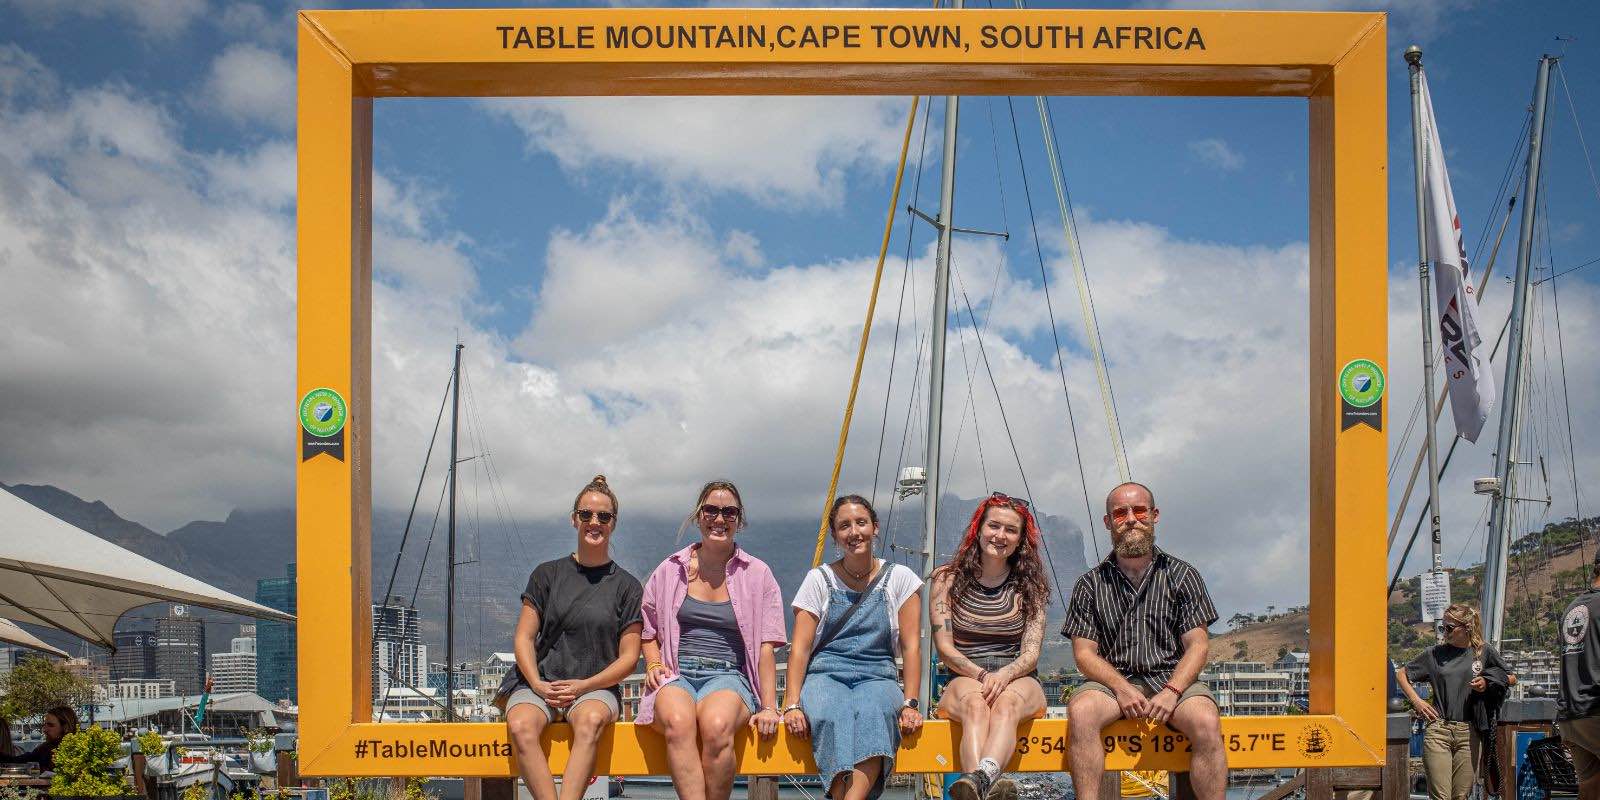 interns sitting on a big rectangle in Table Mountain, Cape Town